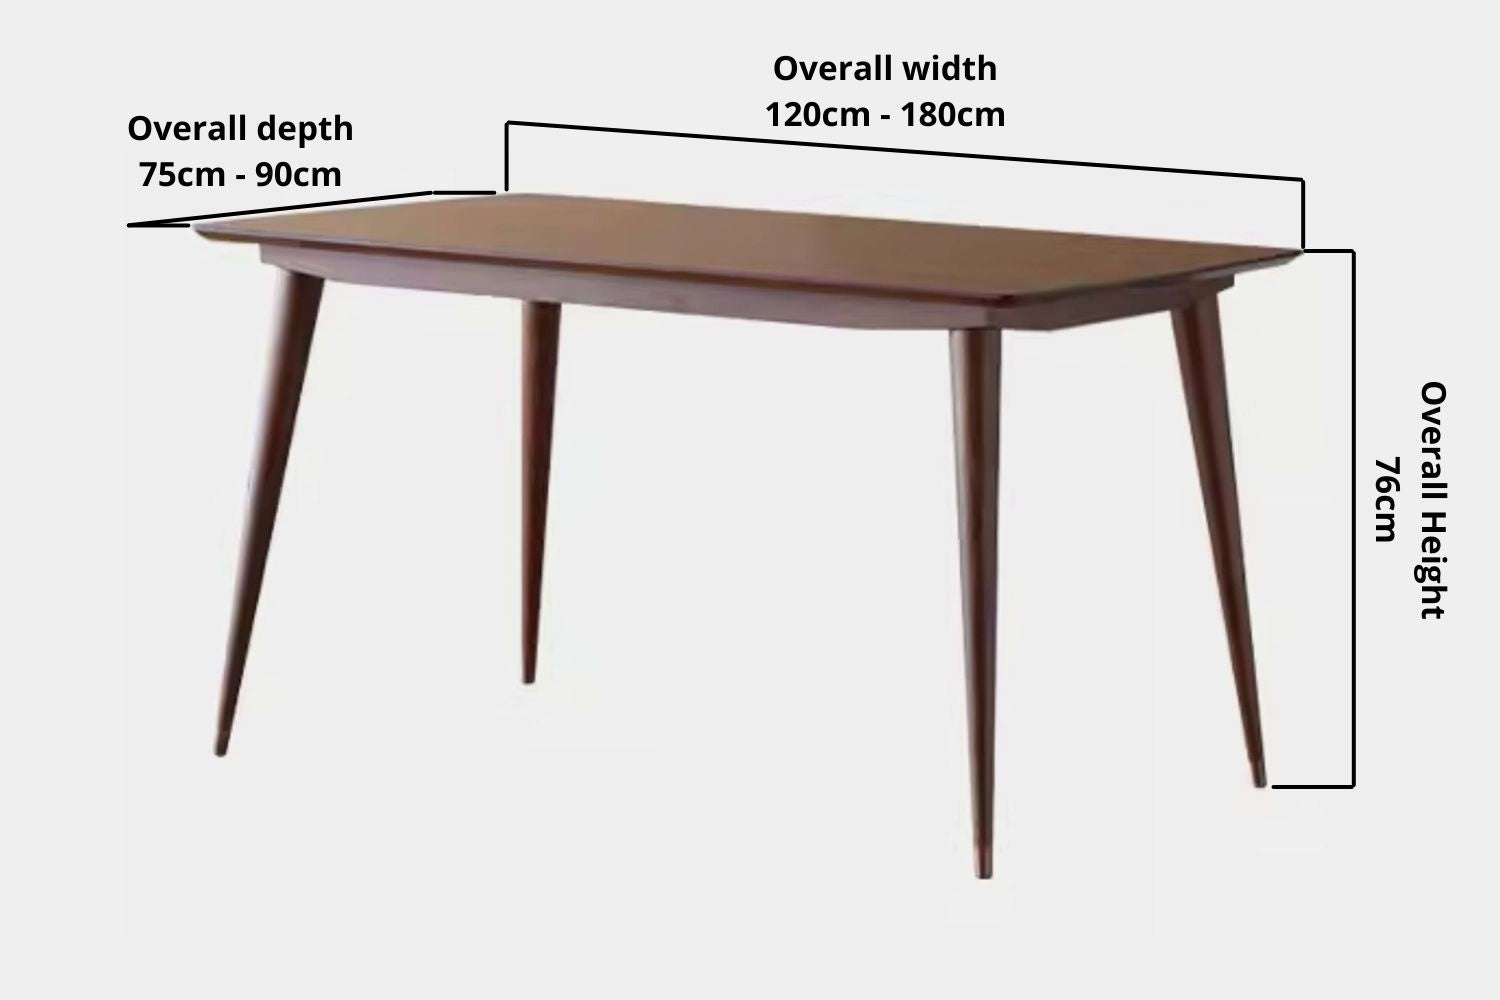 Key product dimensions such as depth, width and height for Tate Poplar Wood Dining Table